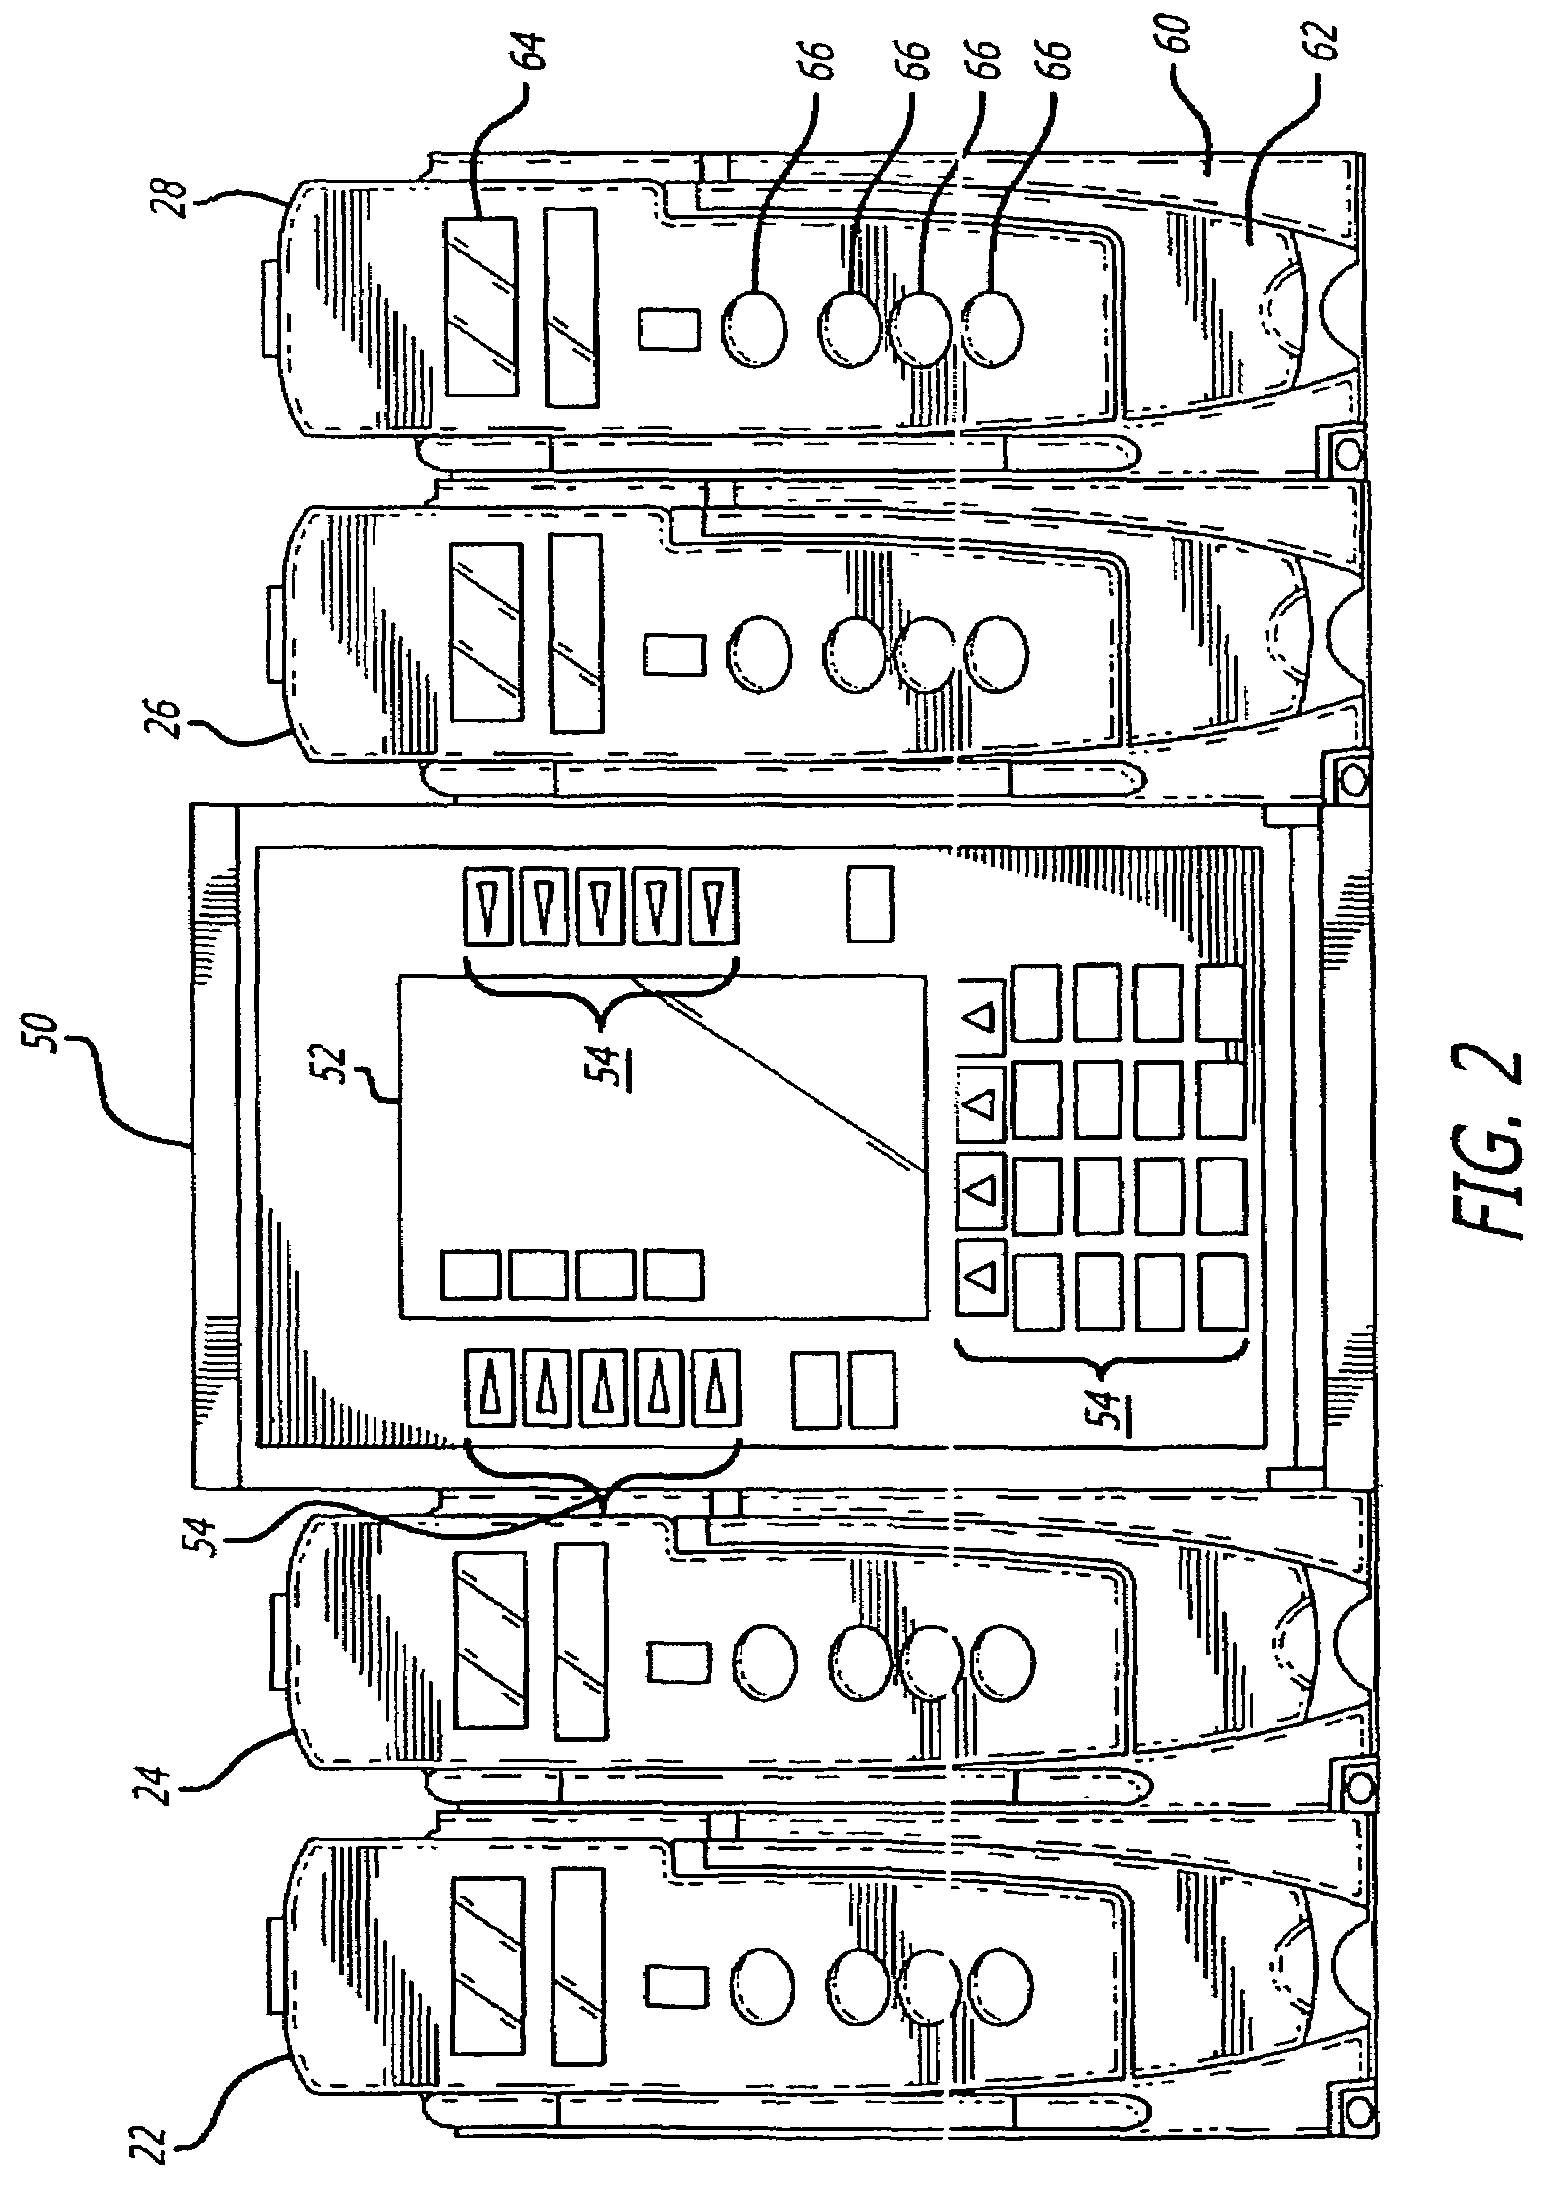 Fluid verification system and method for infusions